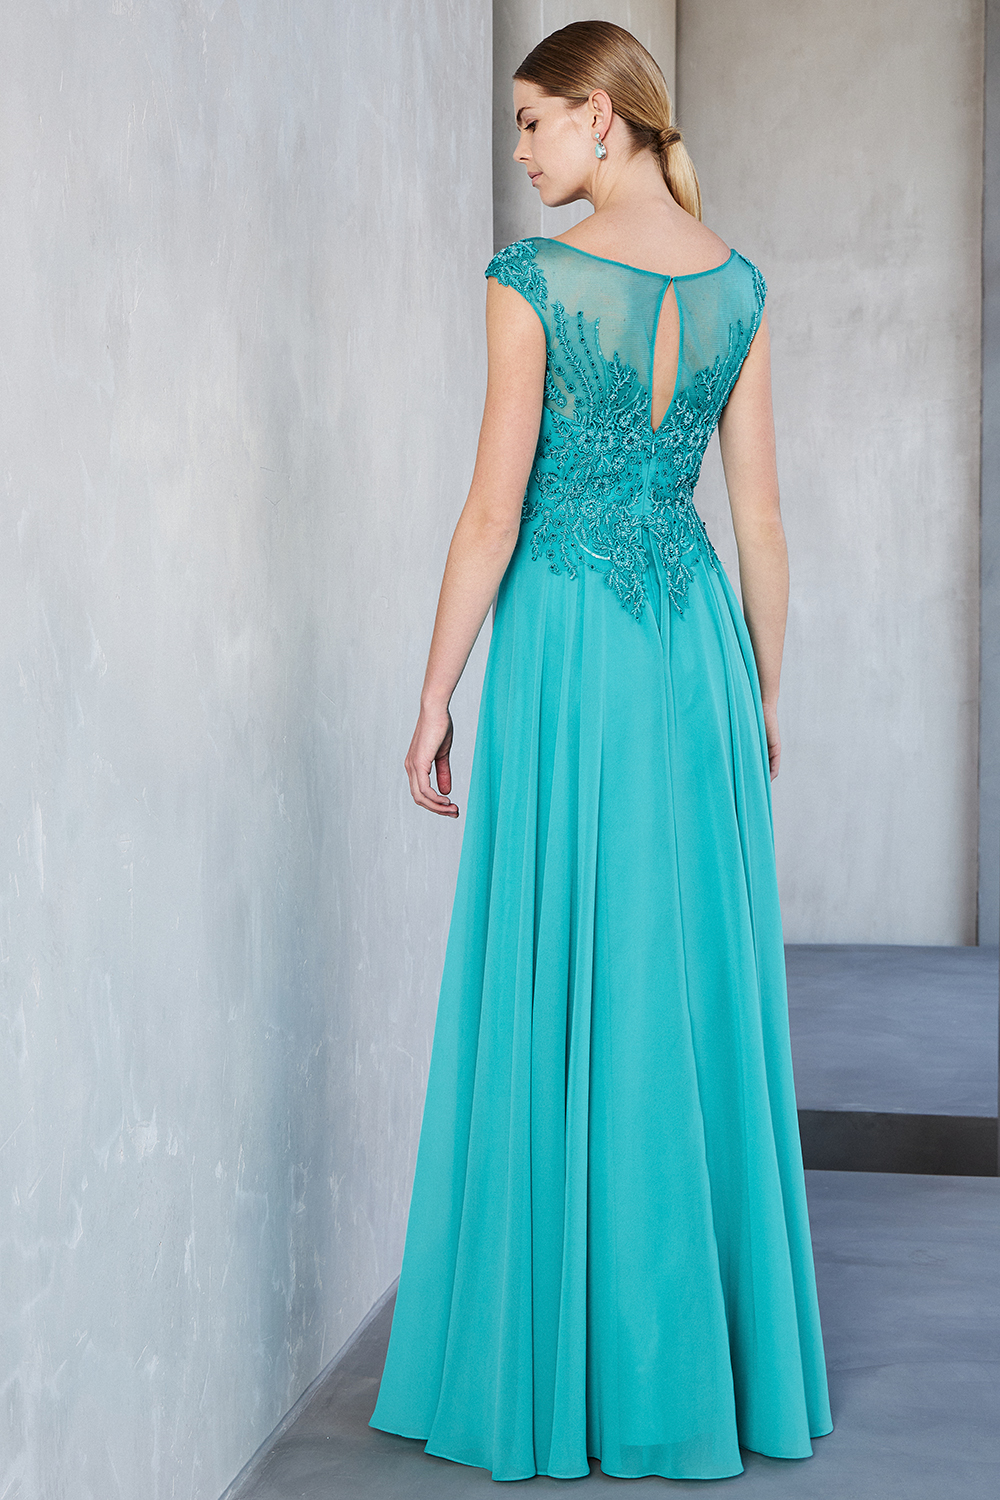 Classic Dresses / Long evening dress with chiffon and beaded top